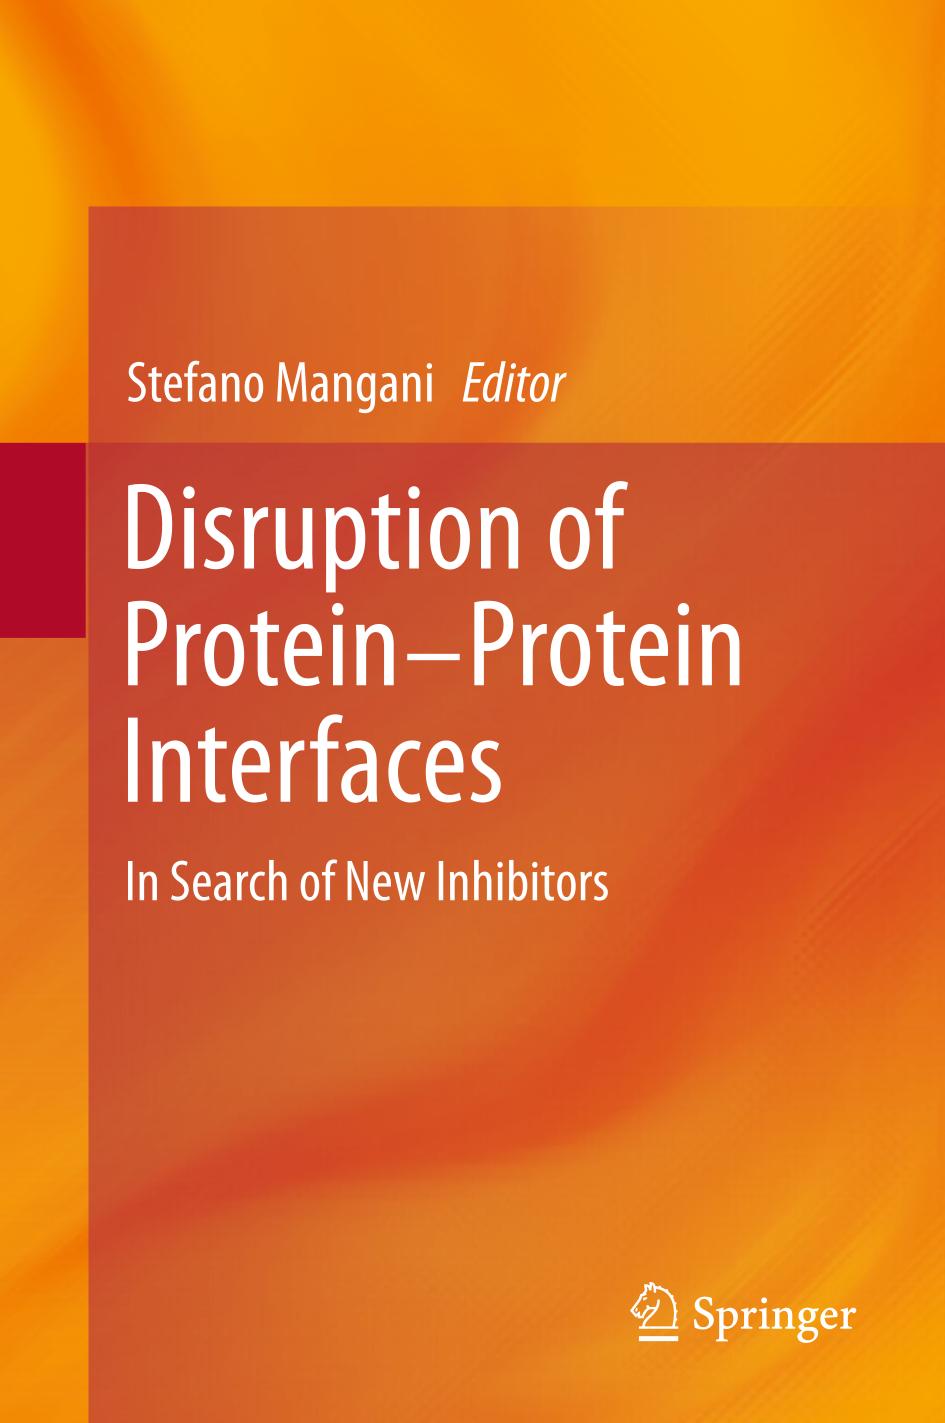 Disruption of Protein-Protein Interfaces In Search of New Inhibitors